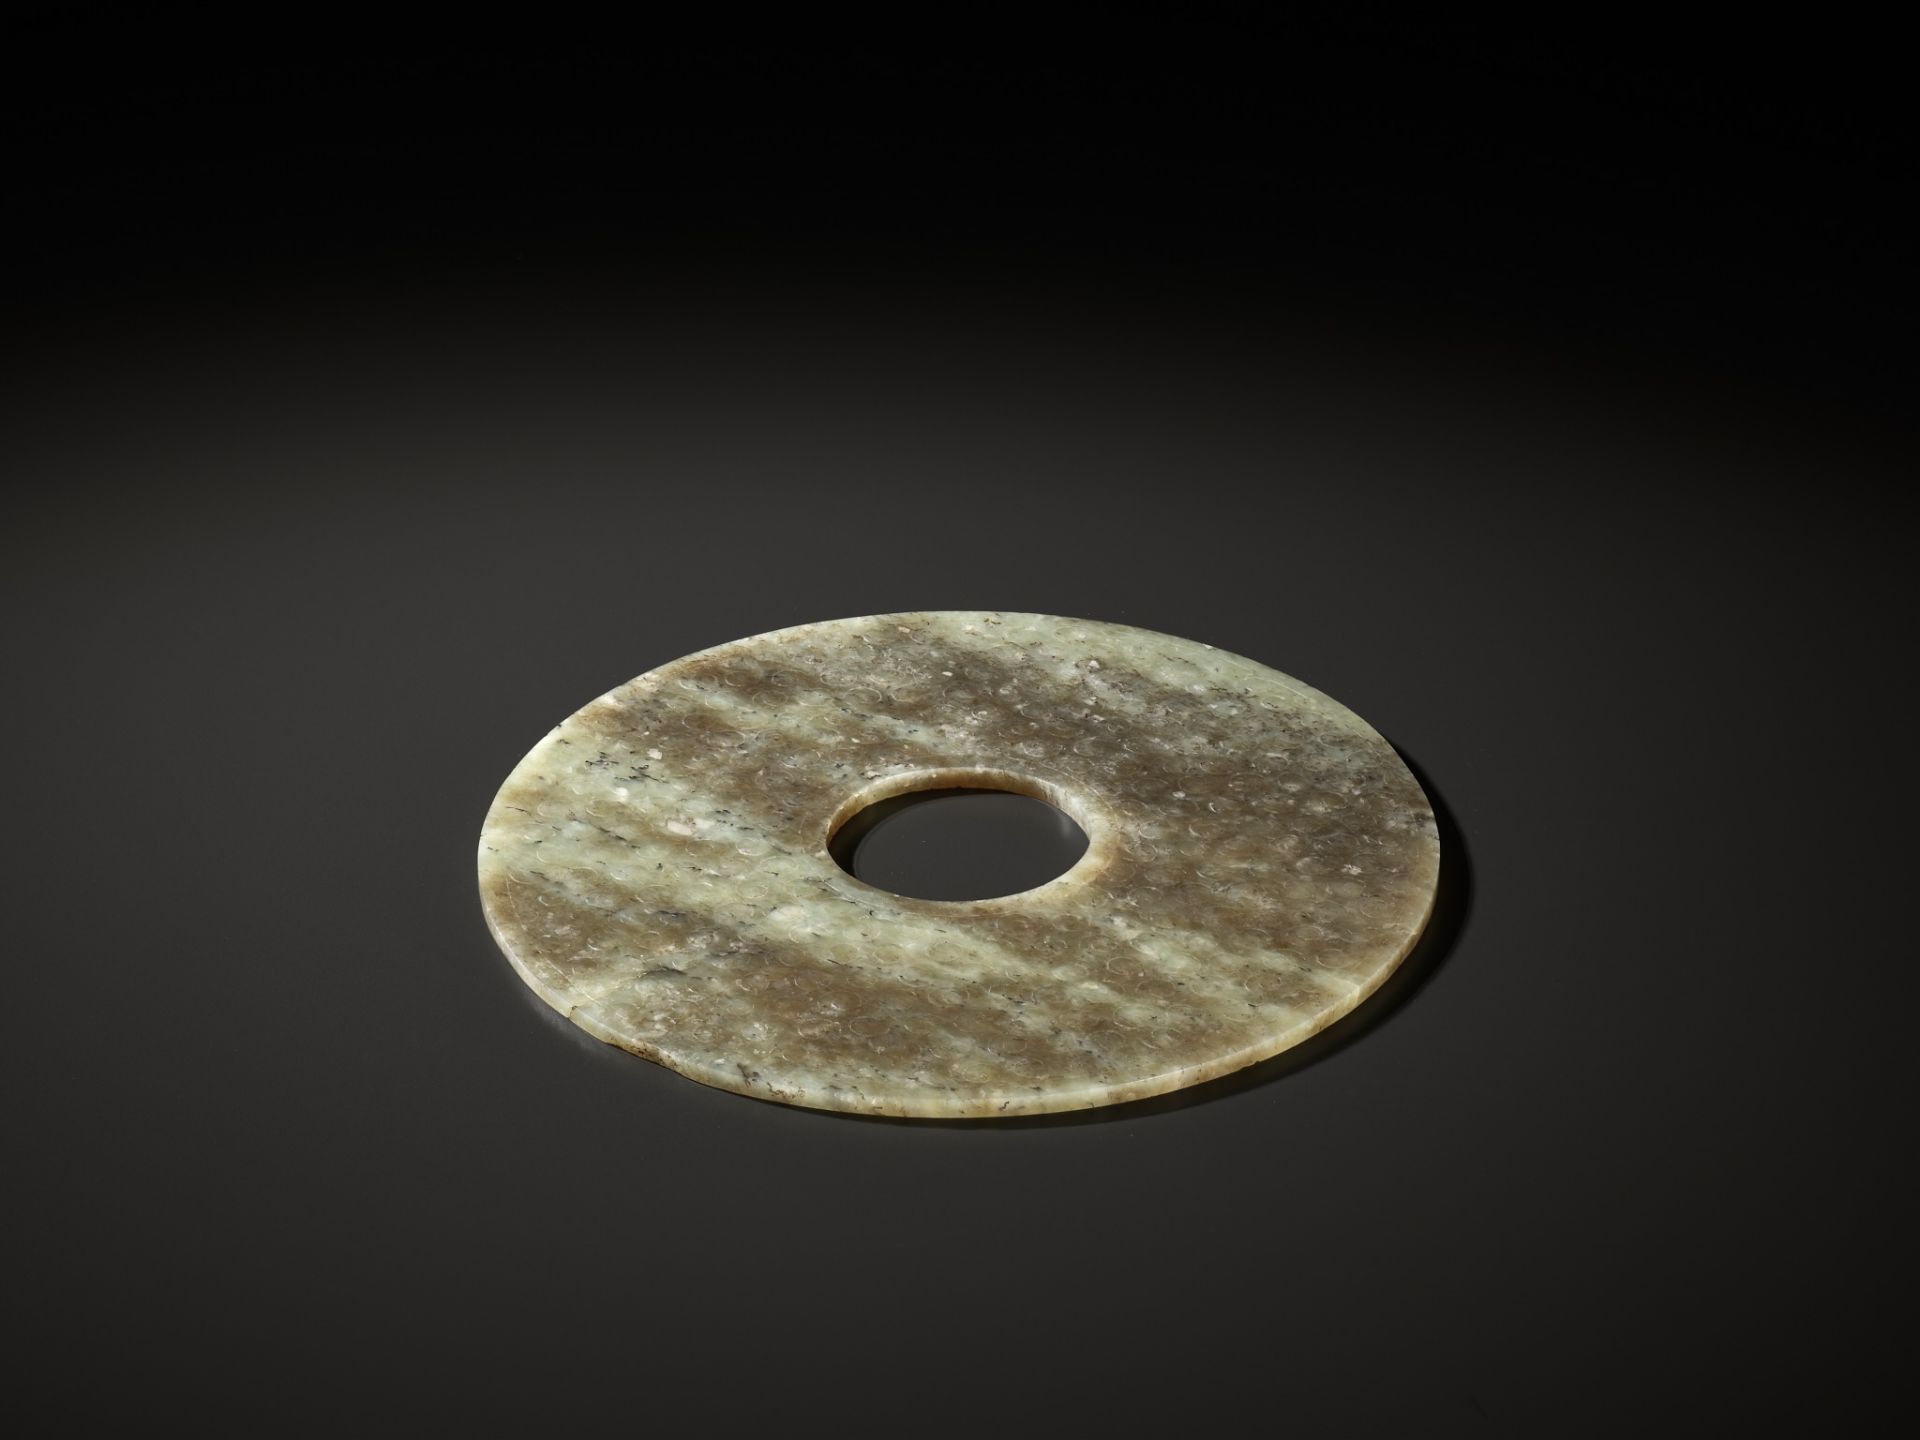 A CELADON AND BROWN JADE BI DISK, EASTERN ZHOU TO WARRING STATES PERIOD - Image 12 of 16